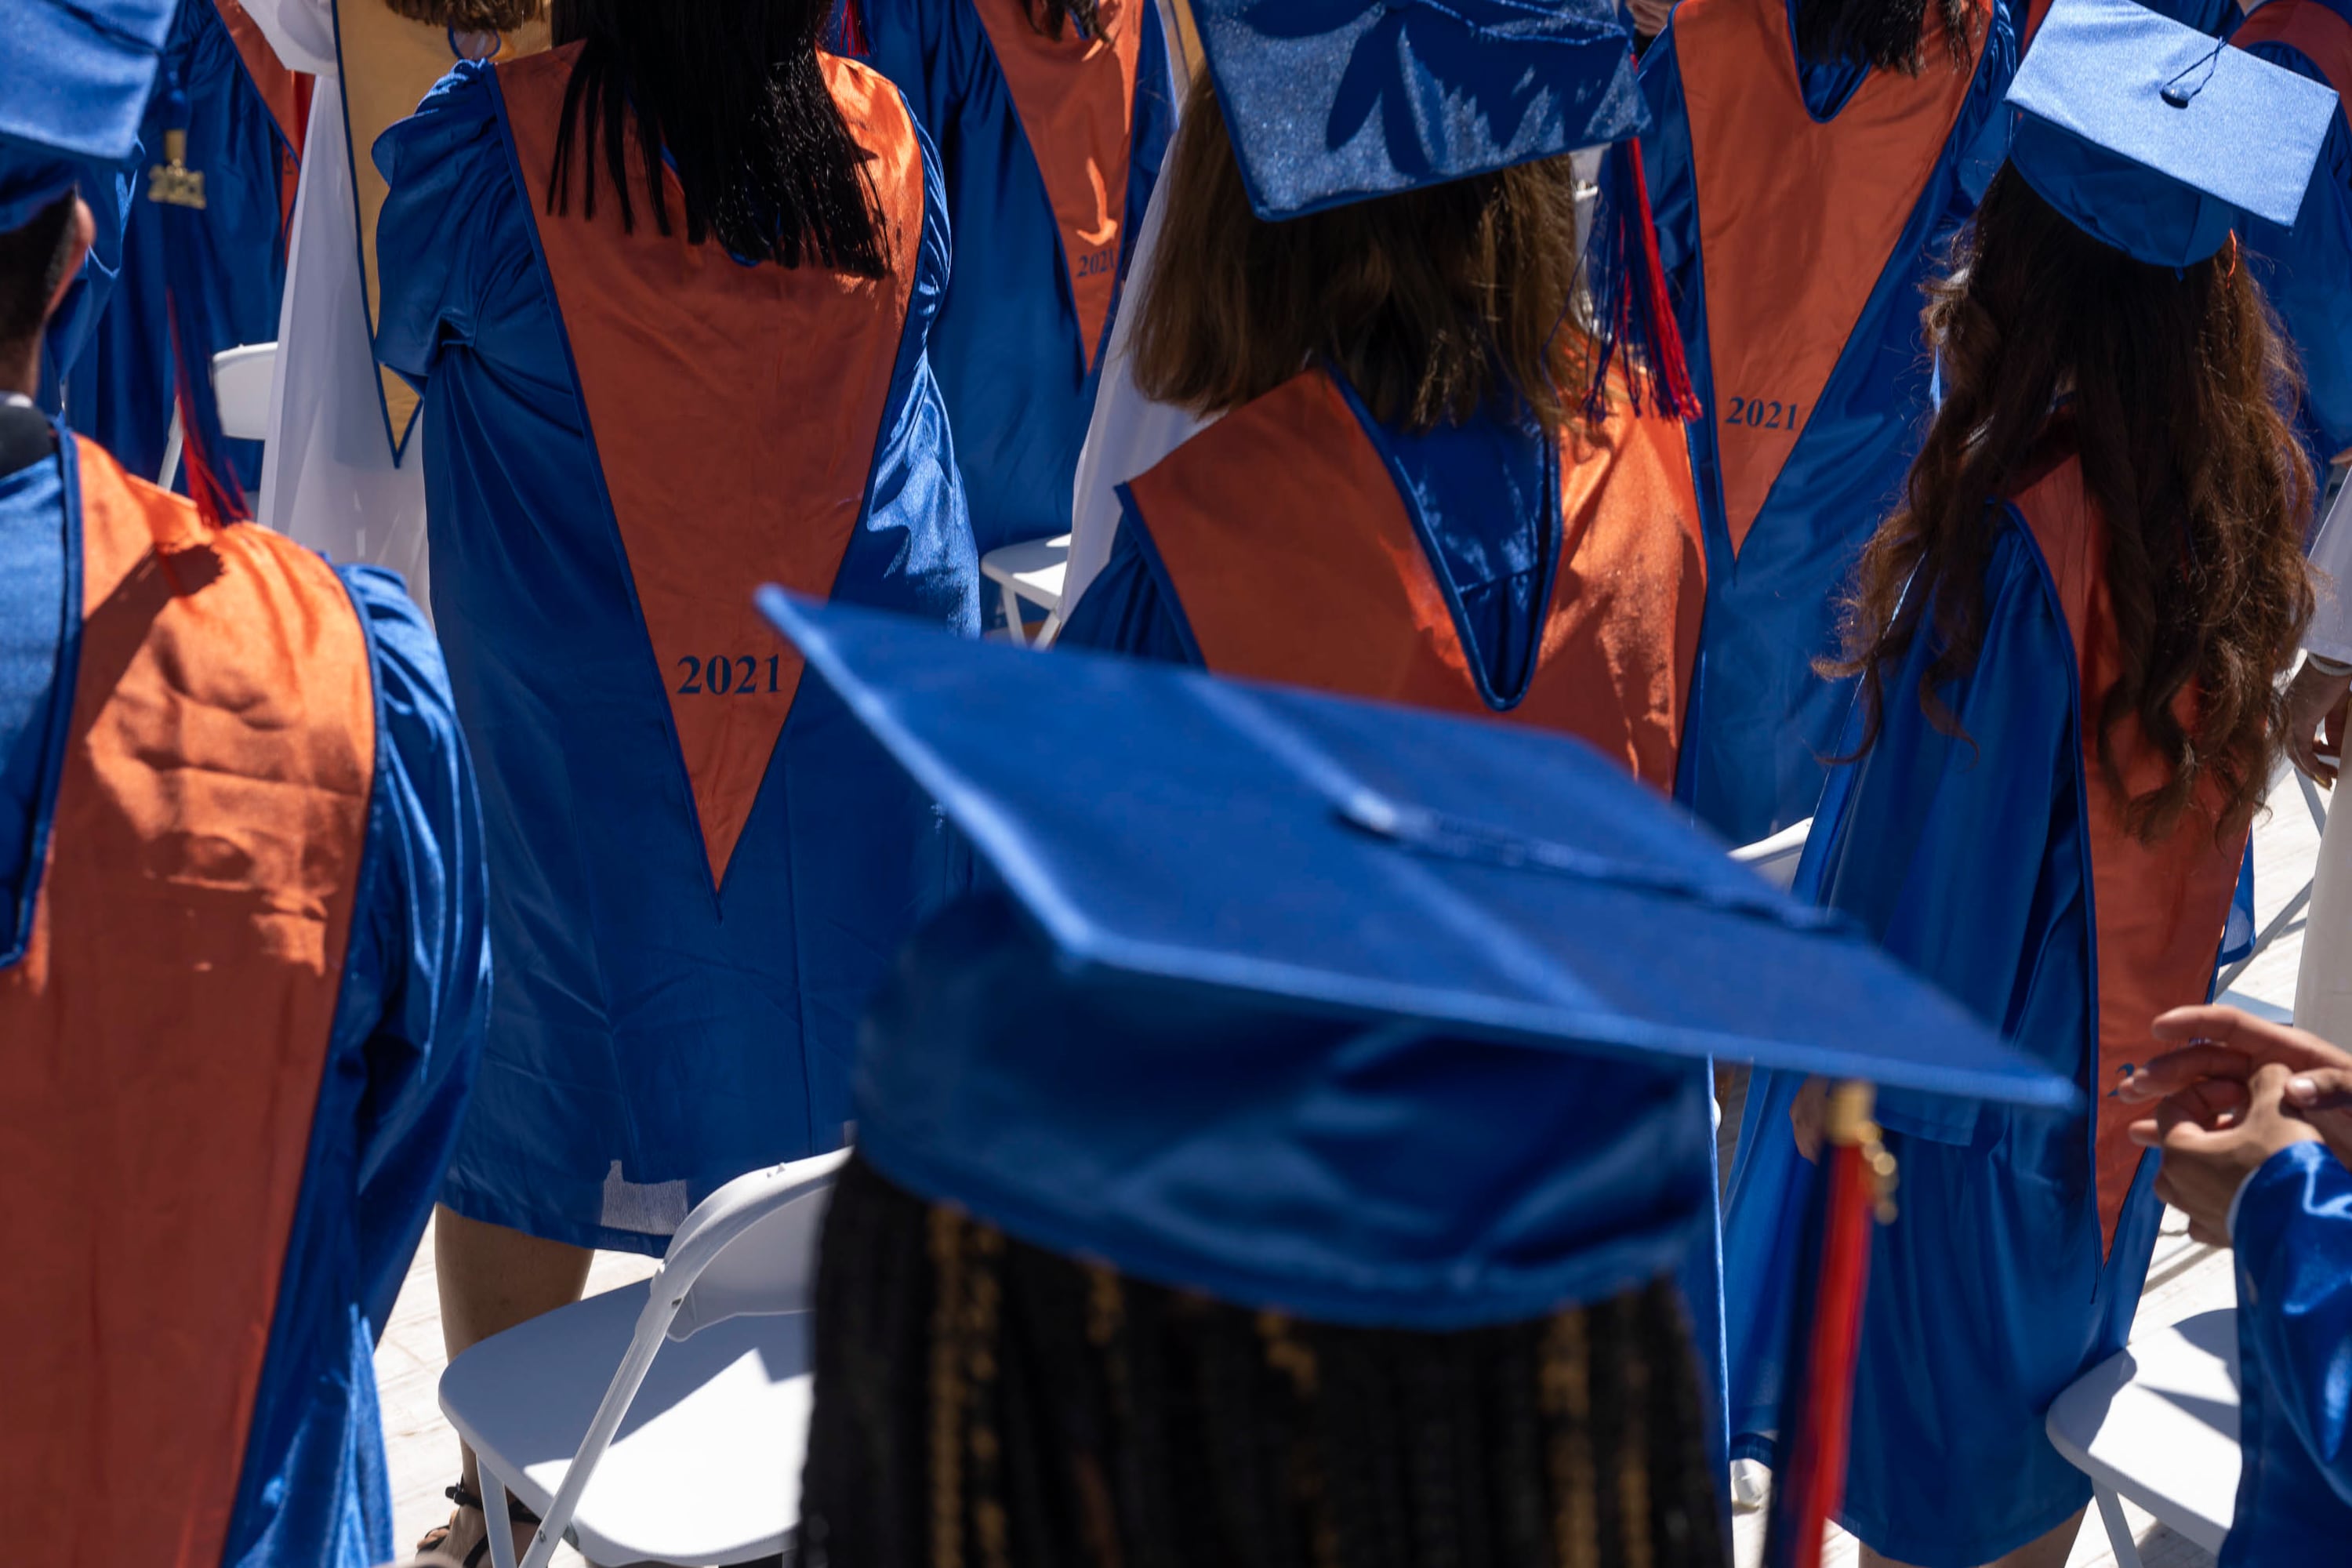 A close up of graduates wearing blue gowns and mortar boards with gold stoles.